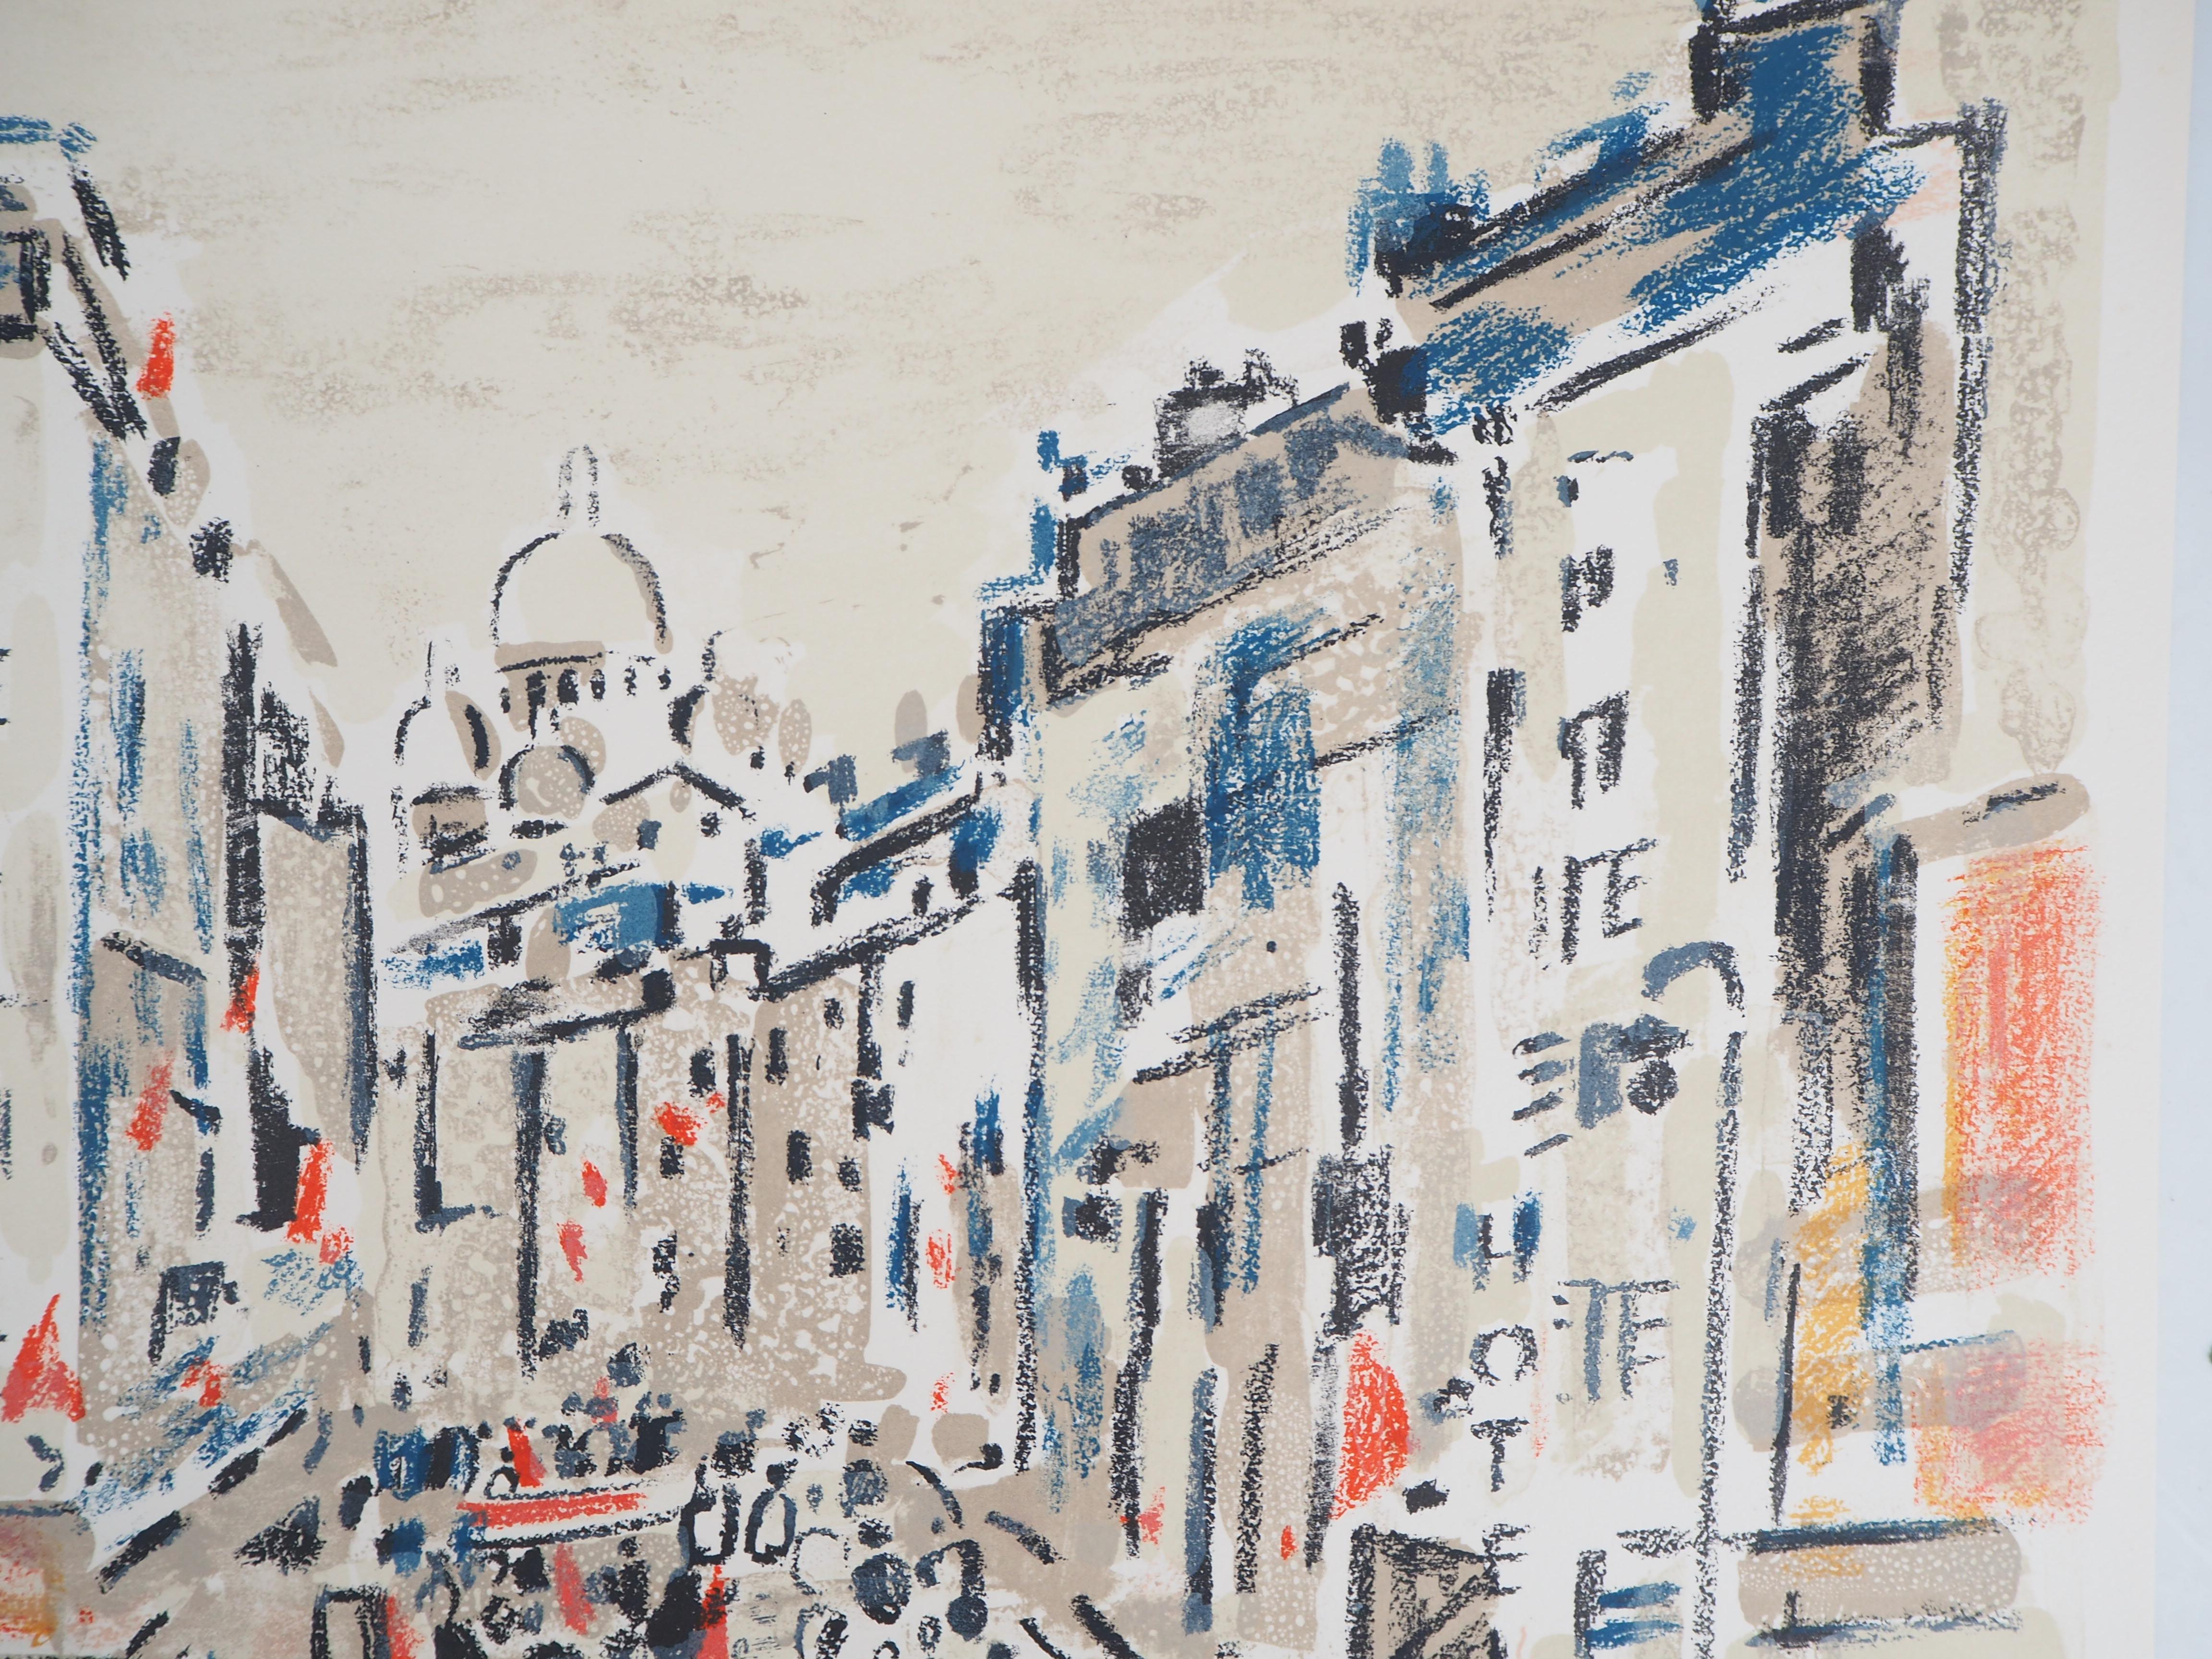 Robert SAVARY
Paris : On the Way to Montmartre, 1969

Original lithograph (Mourlot workshop)
Handsigned in pencil
On Arches vellum 37 x 58 cm (c. 16 x 23 in)

Excellent condition